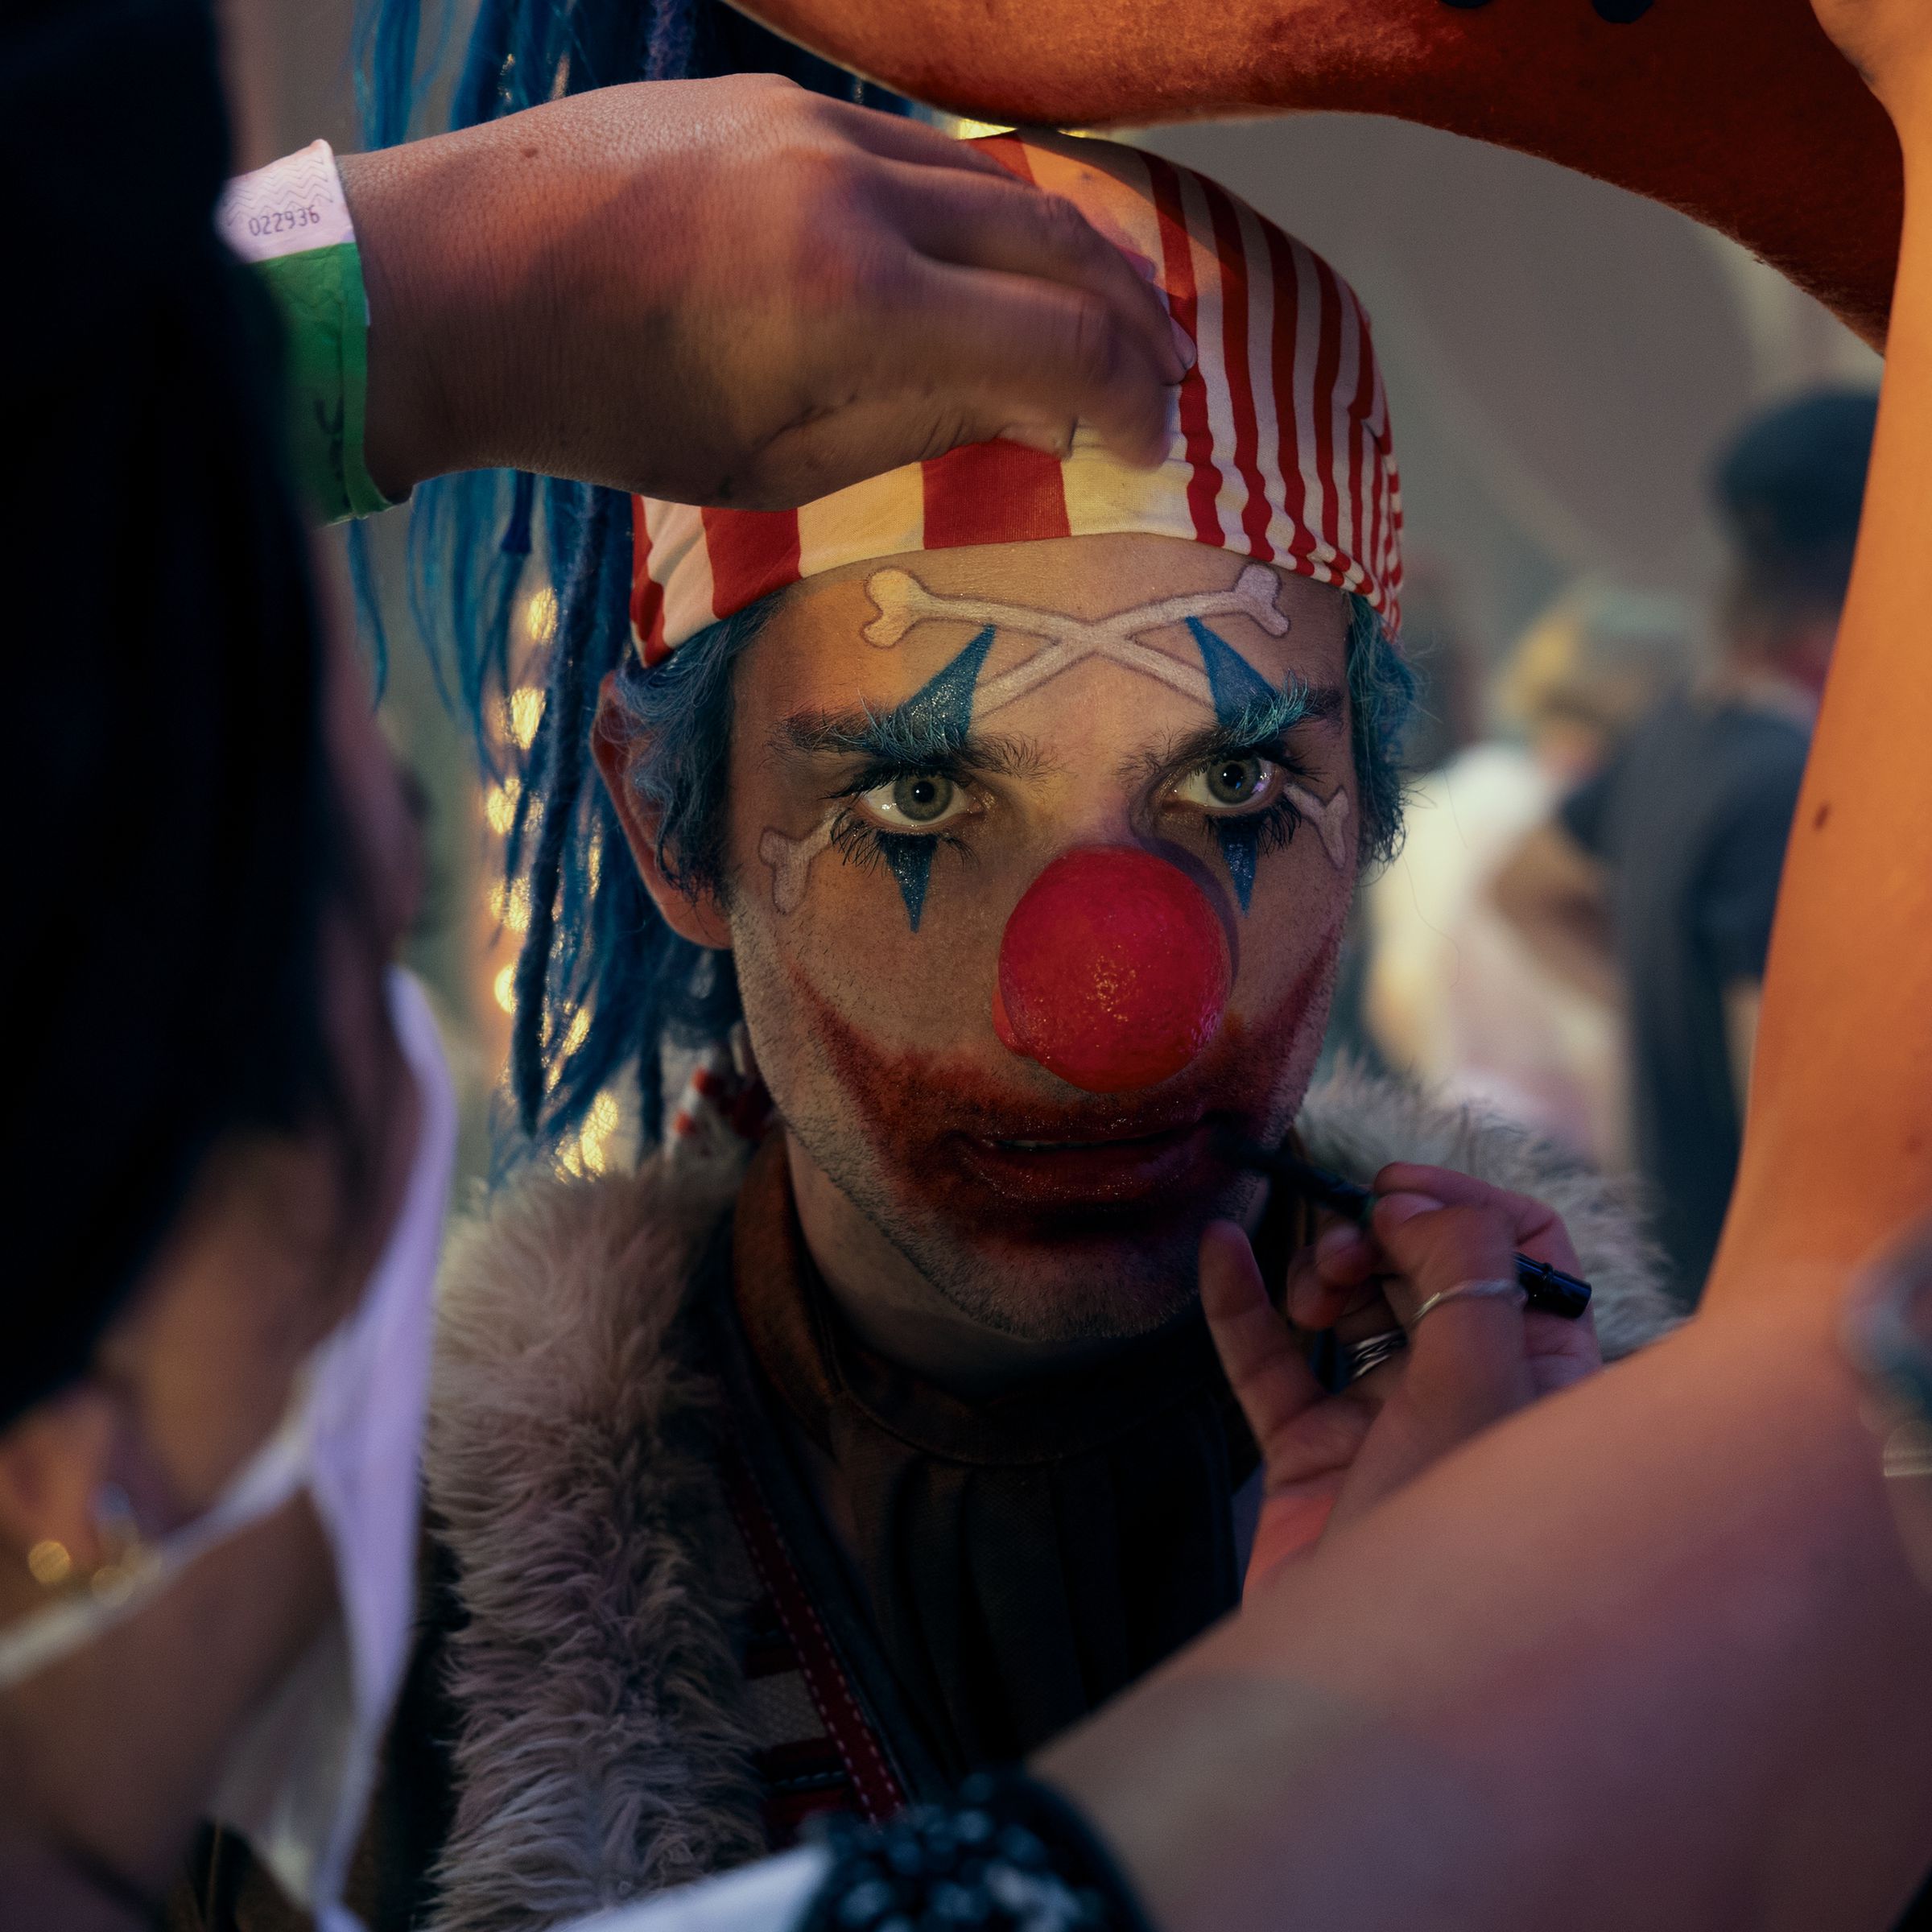 A close-up shop of an actor made up to look like a clown as production workers fine-tune his makeup in between shoots.